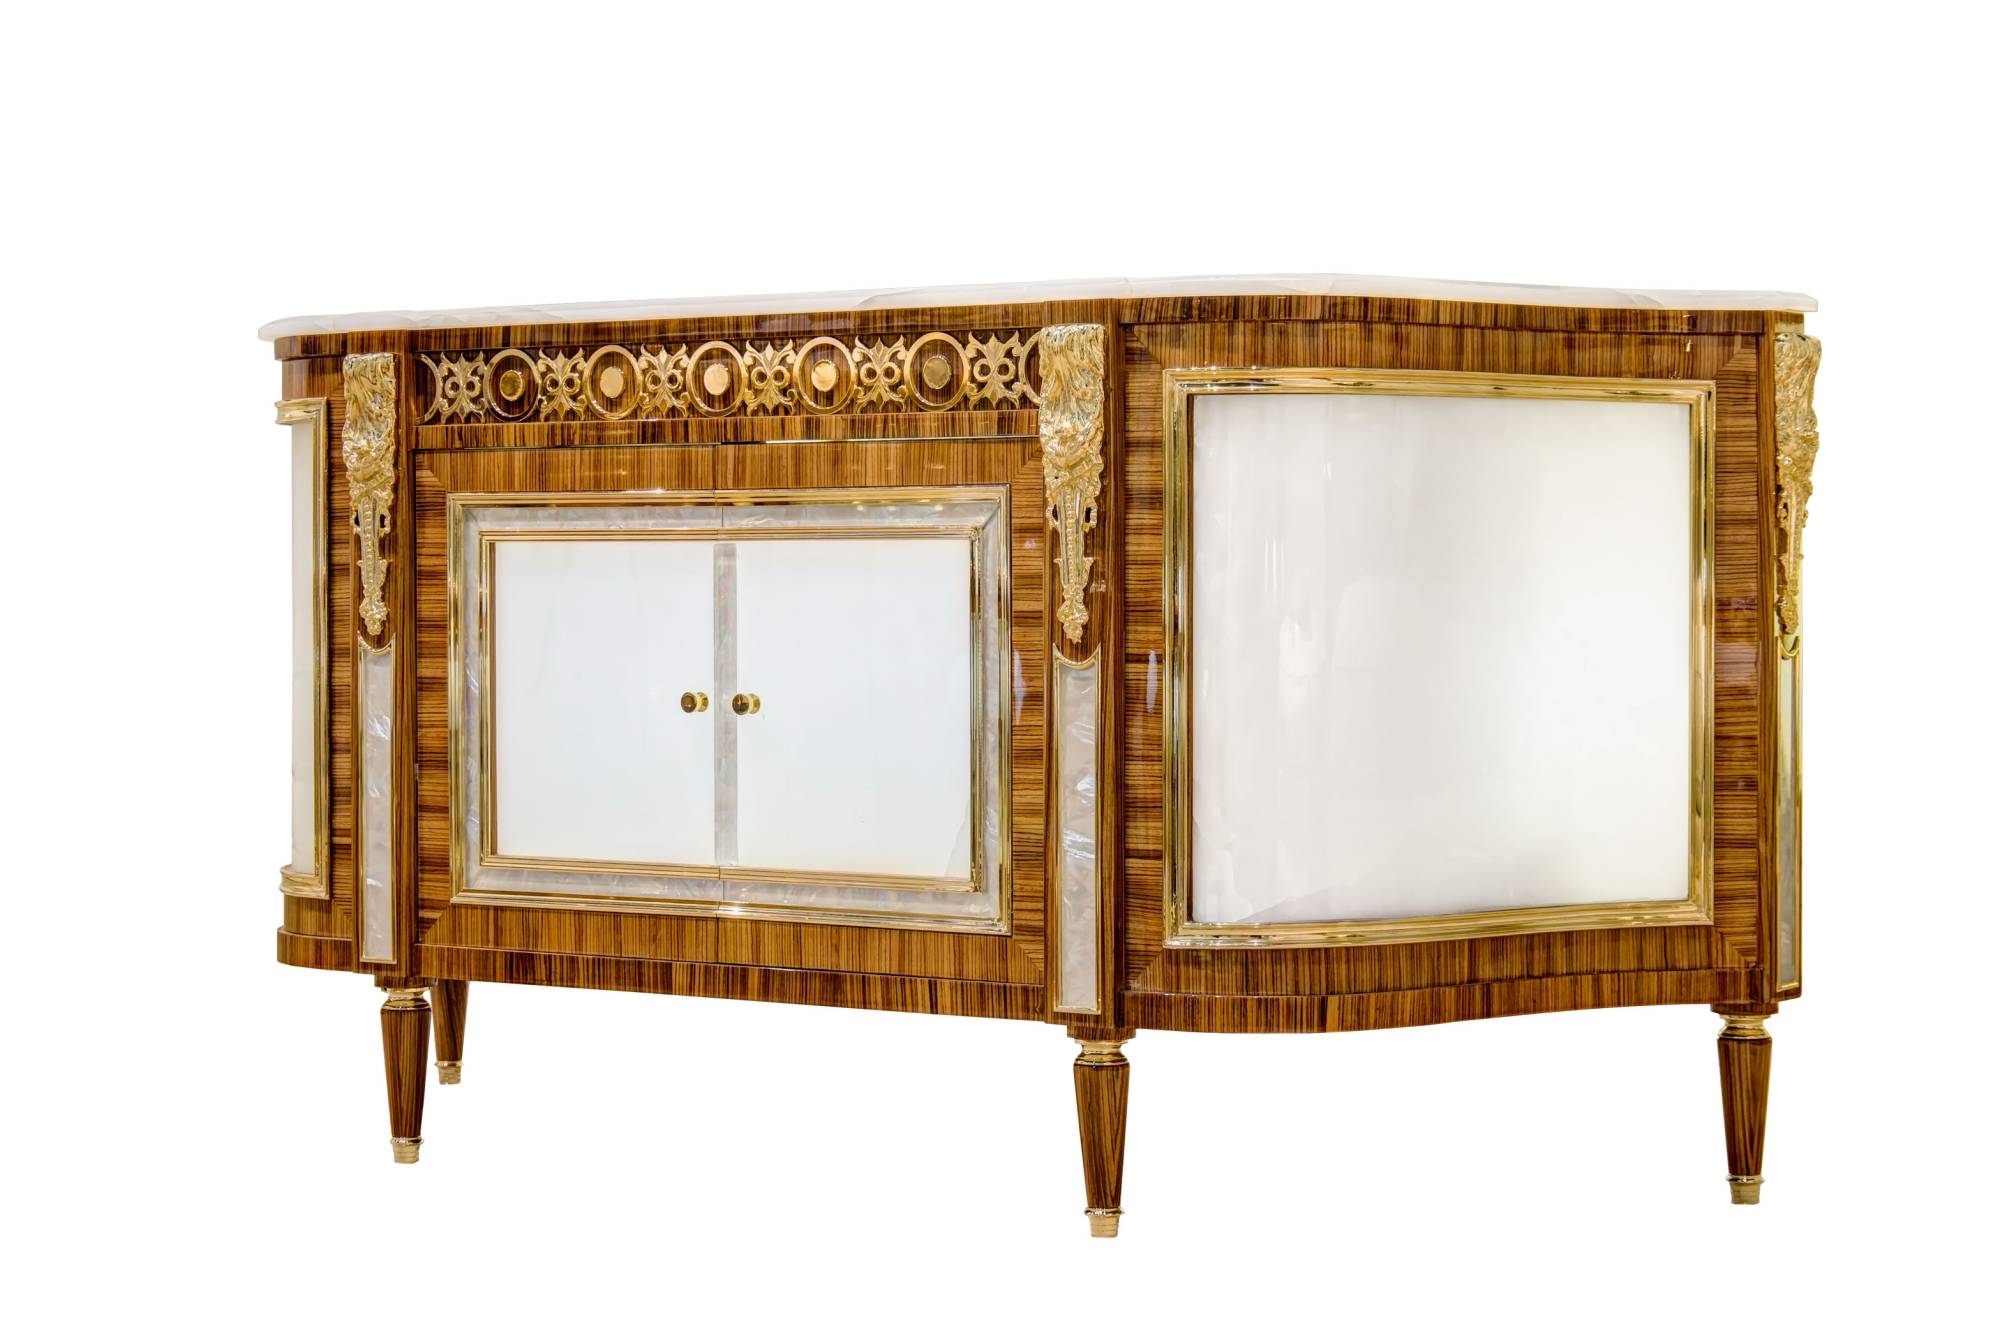 ART. 2079 - C.G. Capelletti quality furniture and timeless elegance with luxury made in italy contemporary Sideboards.